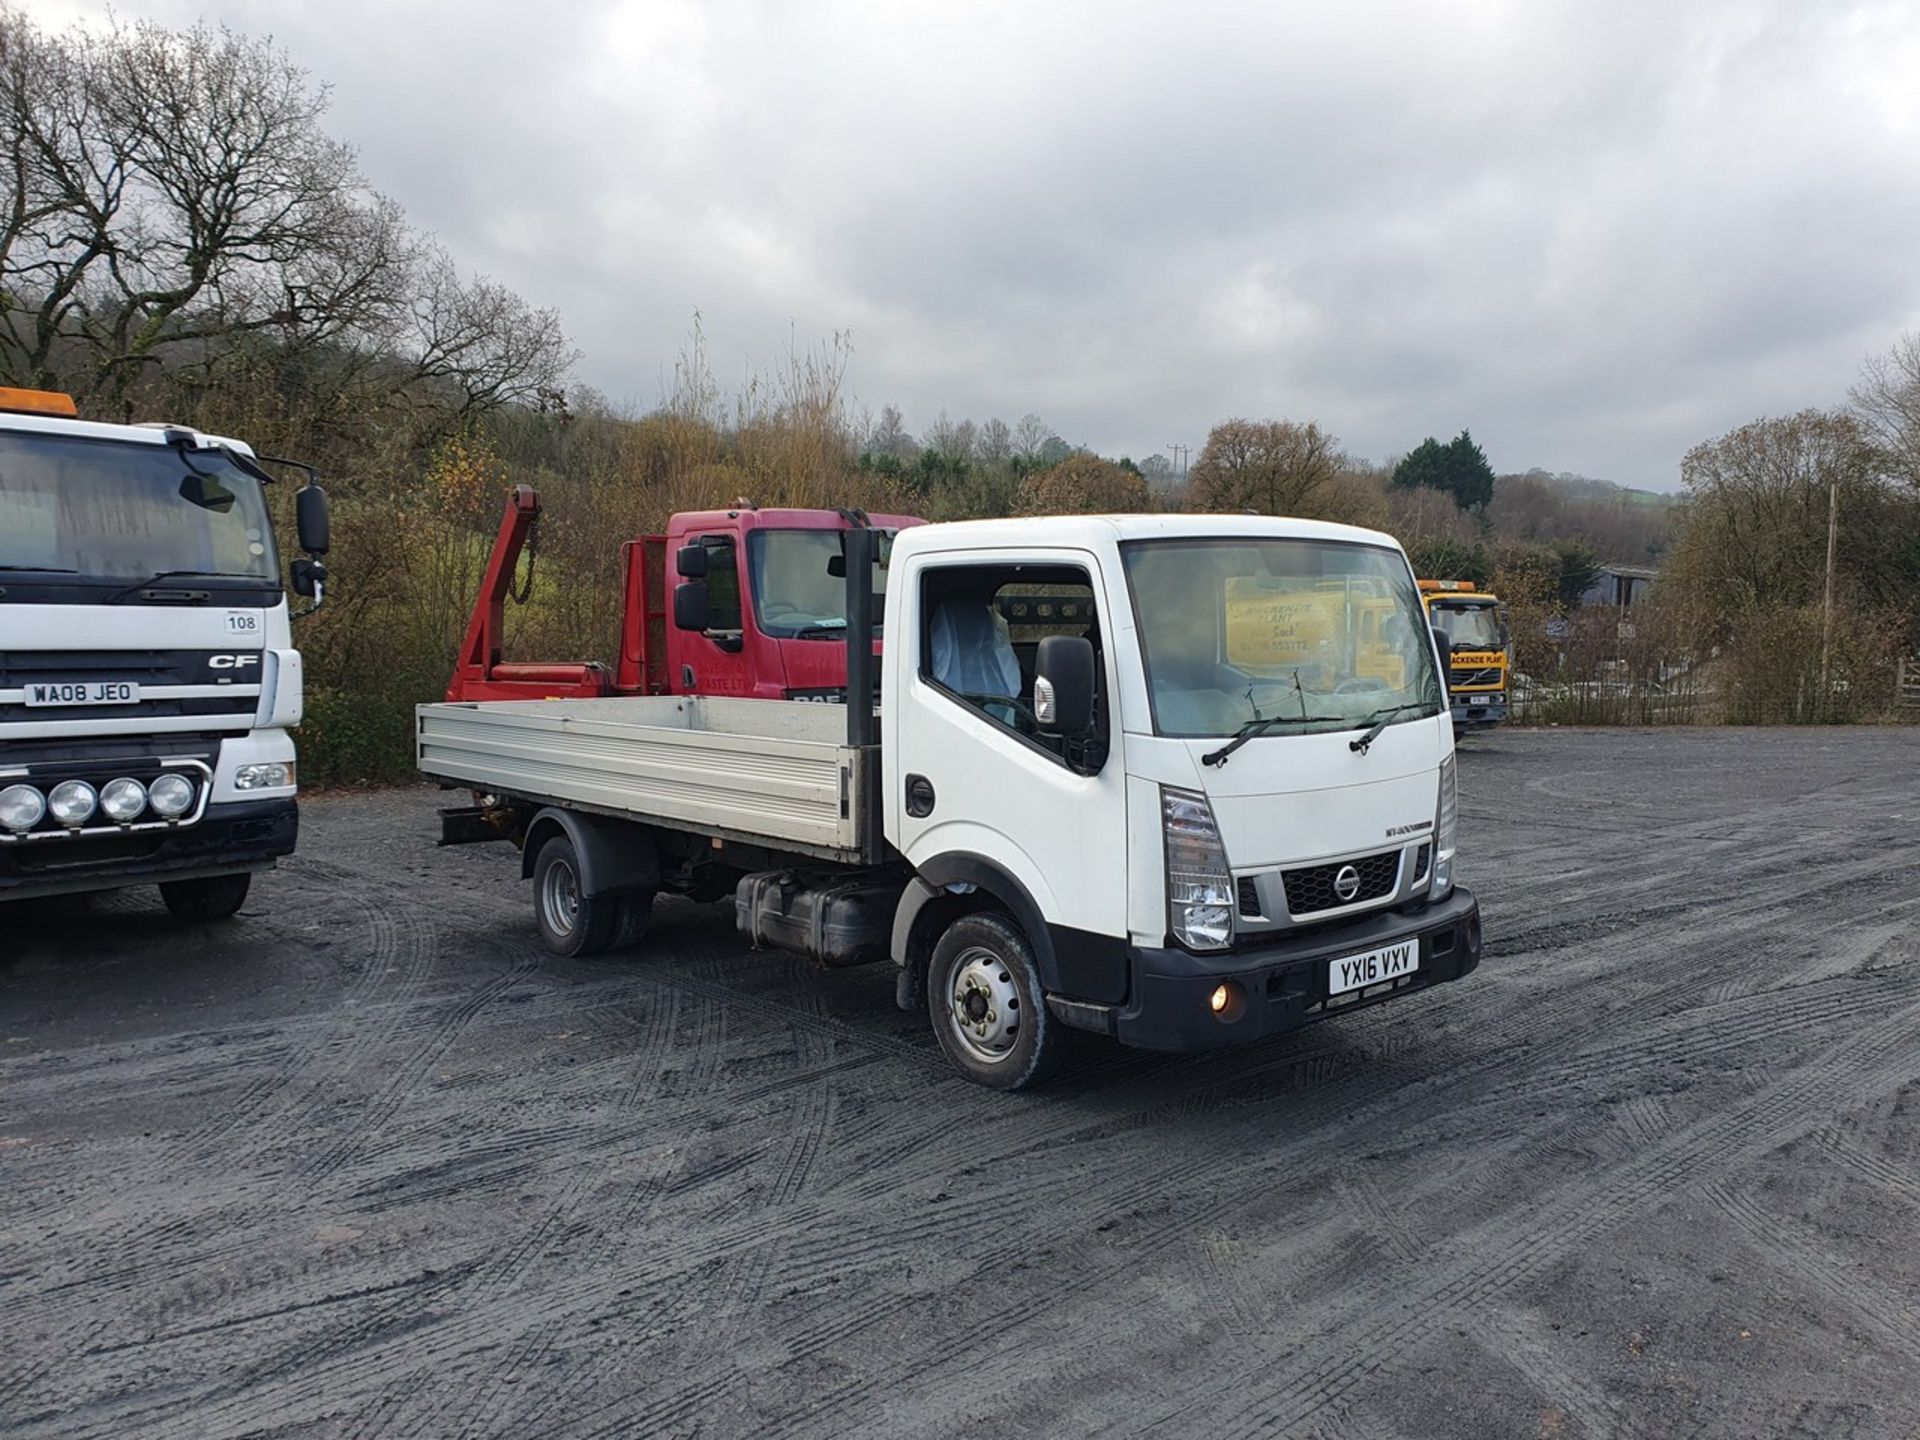 16/16 NISSAN NT400 CABSTAR 35.14 LWB D - 2488cc 2dr Flat Bed (White) - Image 2 of 33